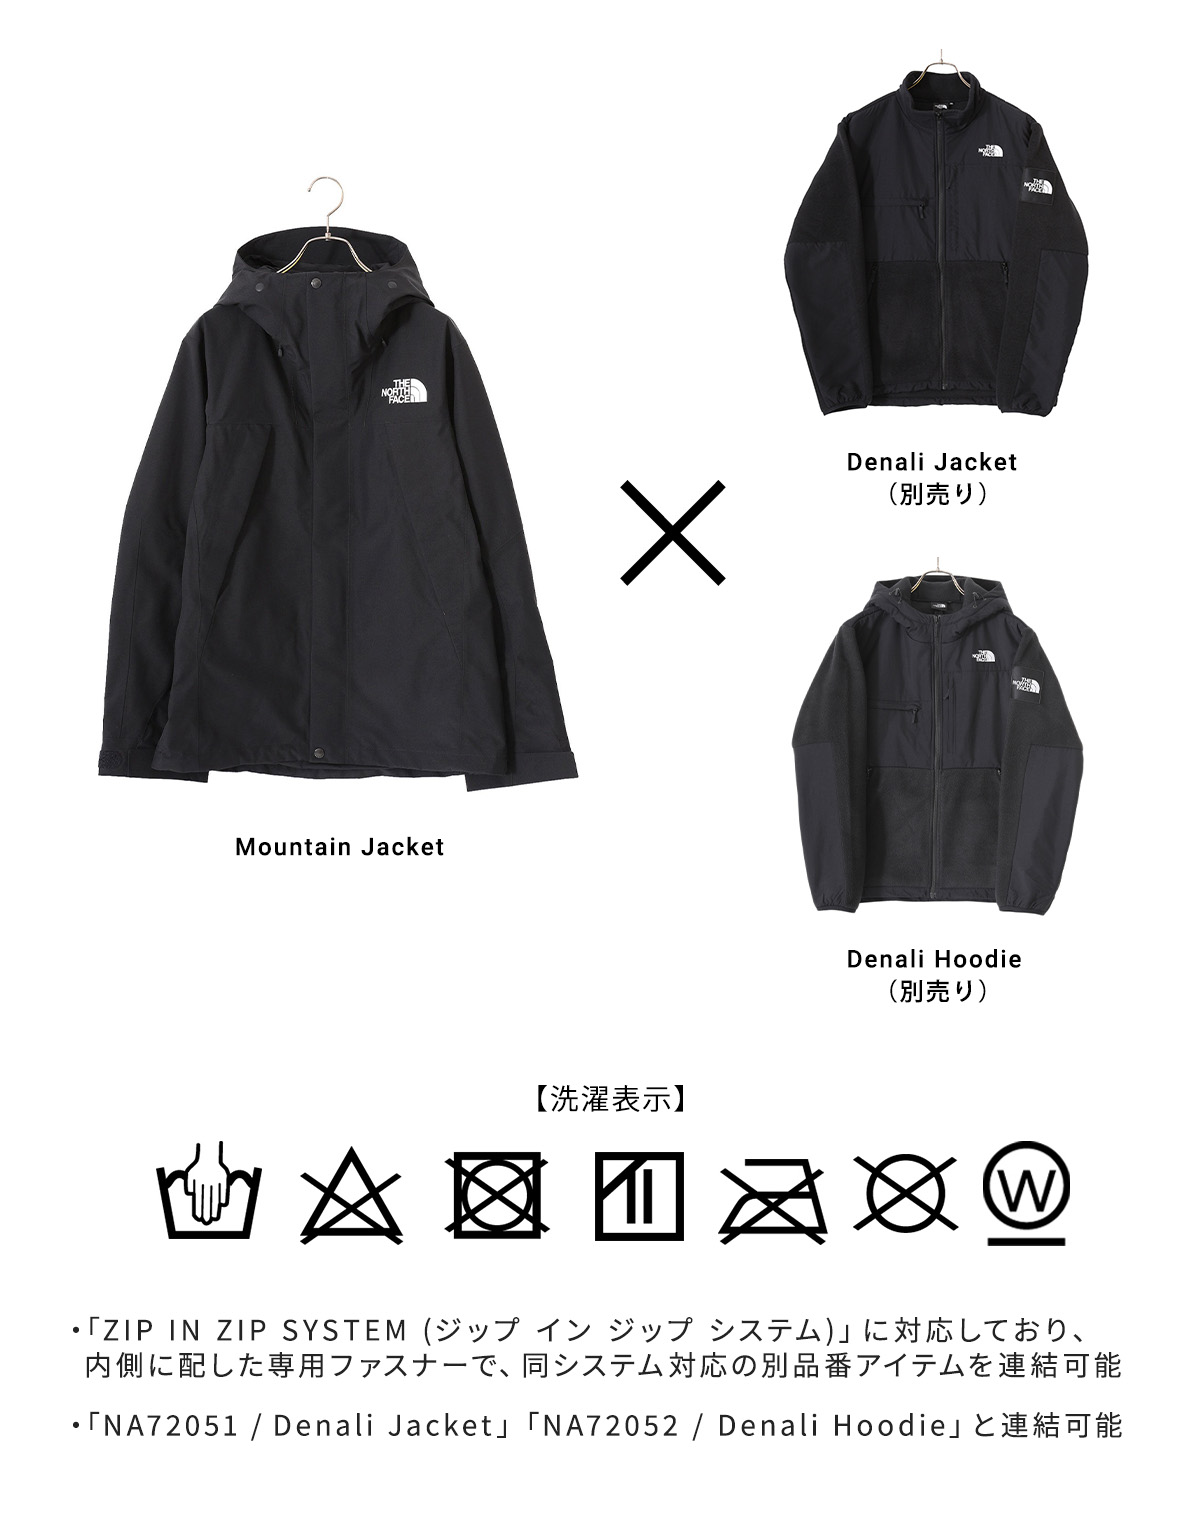 THE NORTH FACE / ザ ノースフェイス ： Mountain Jacket ： NP61800